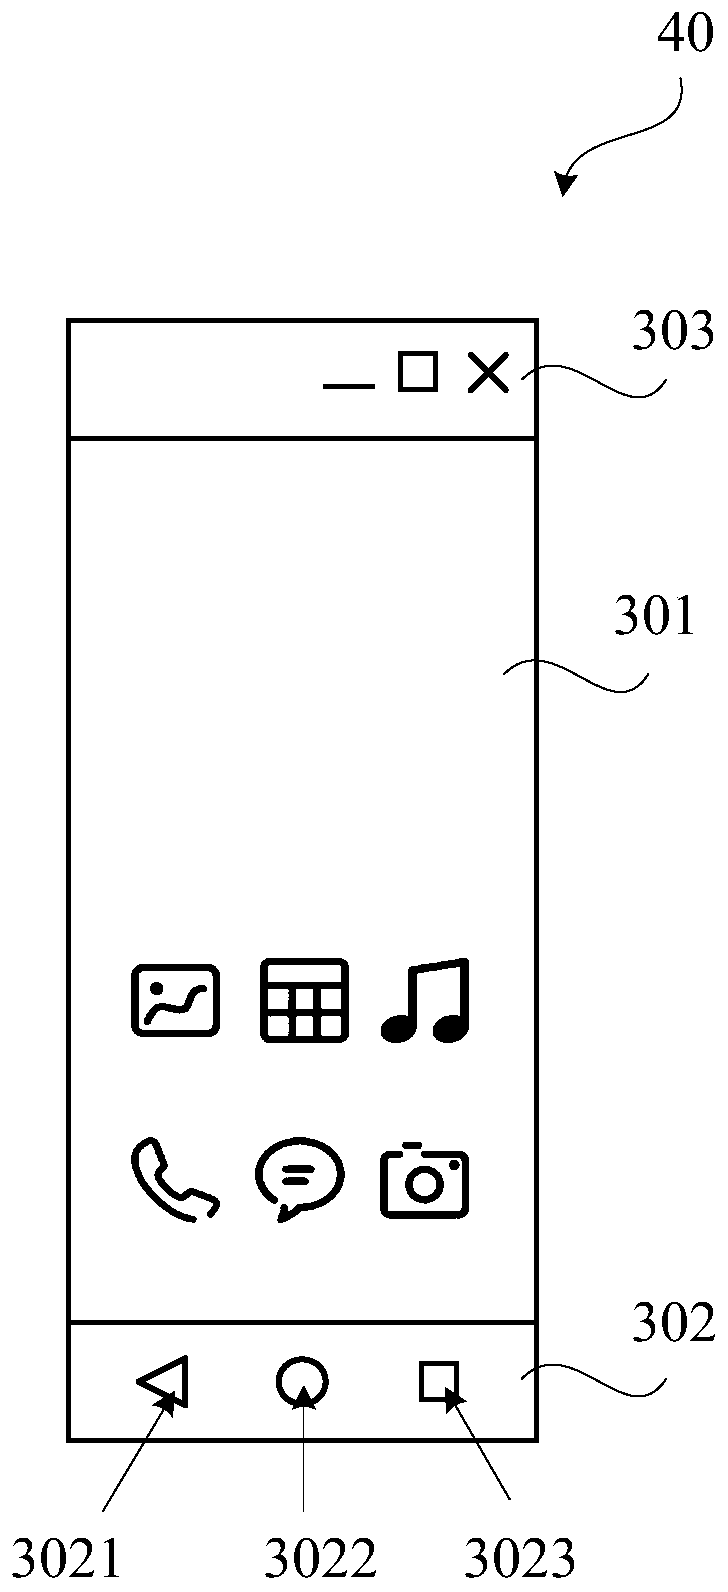 Control method applied to screen projection scene and related equipment